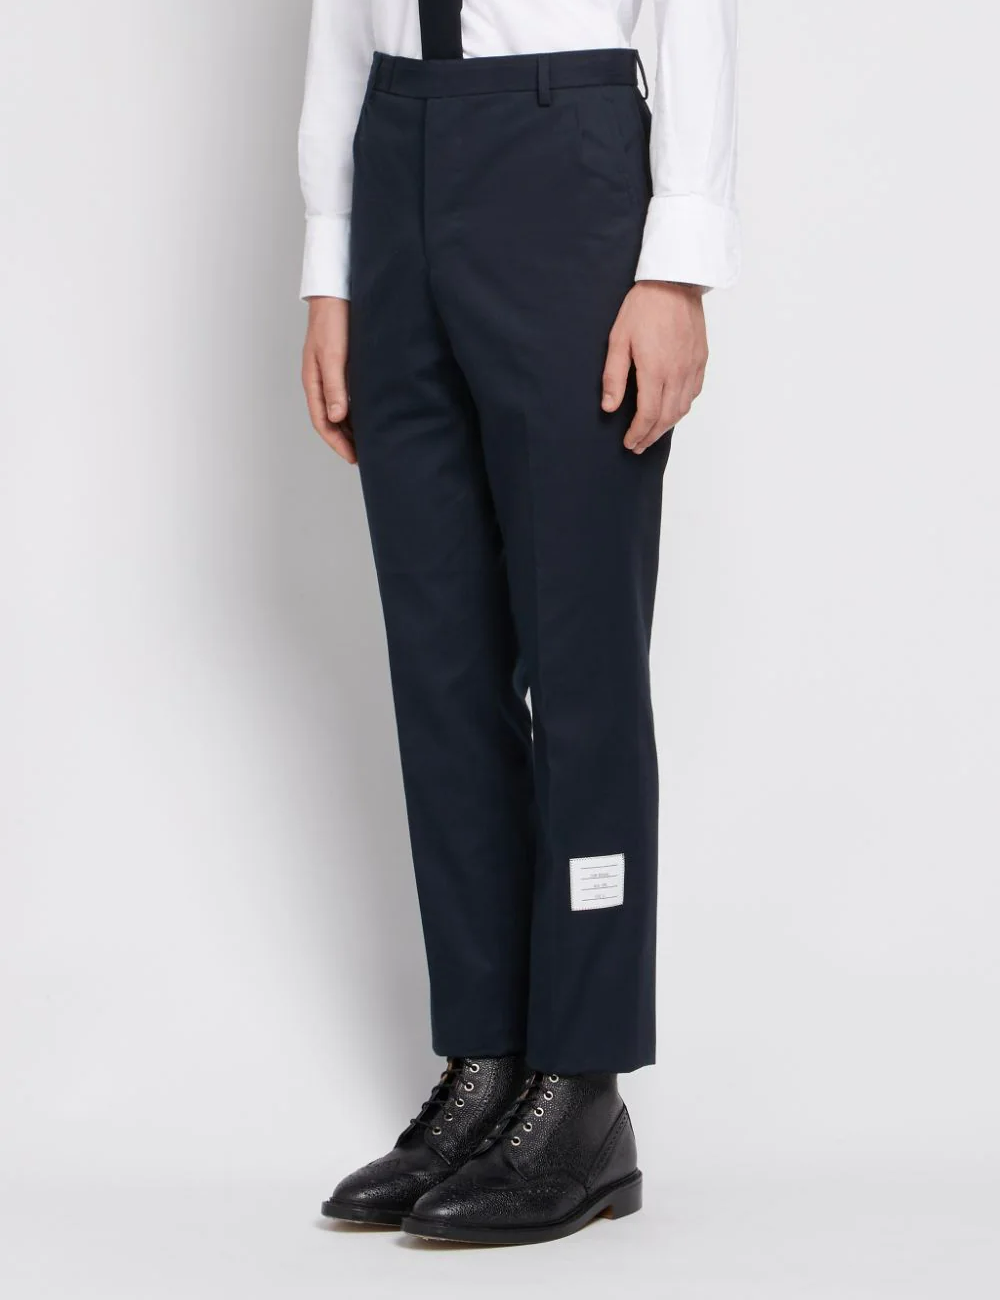 NAVY COTTON TWILL UNCONSTRUCTED CHINO TROUSER